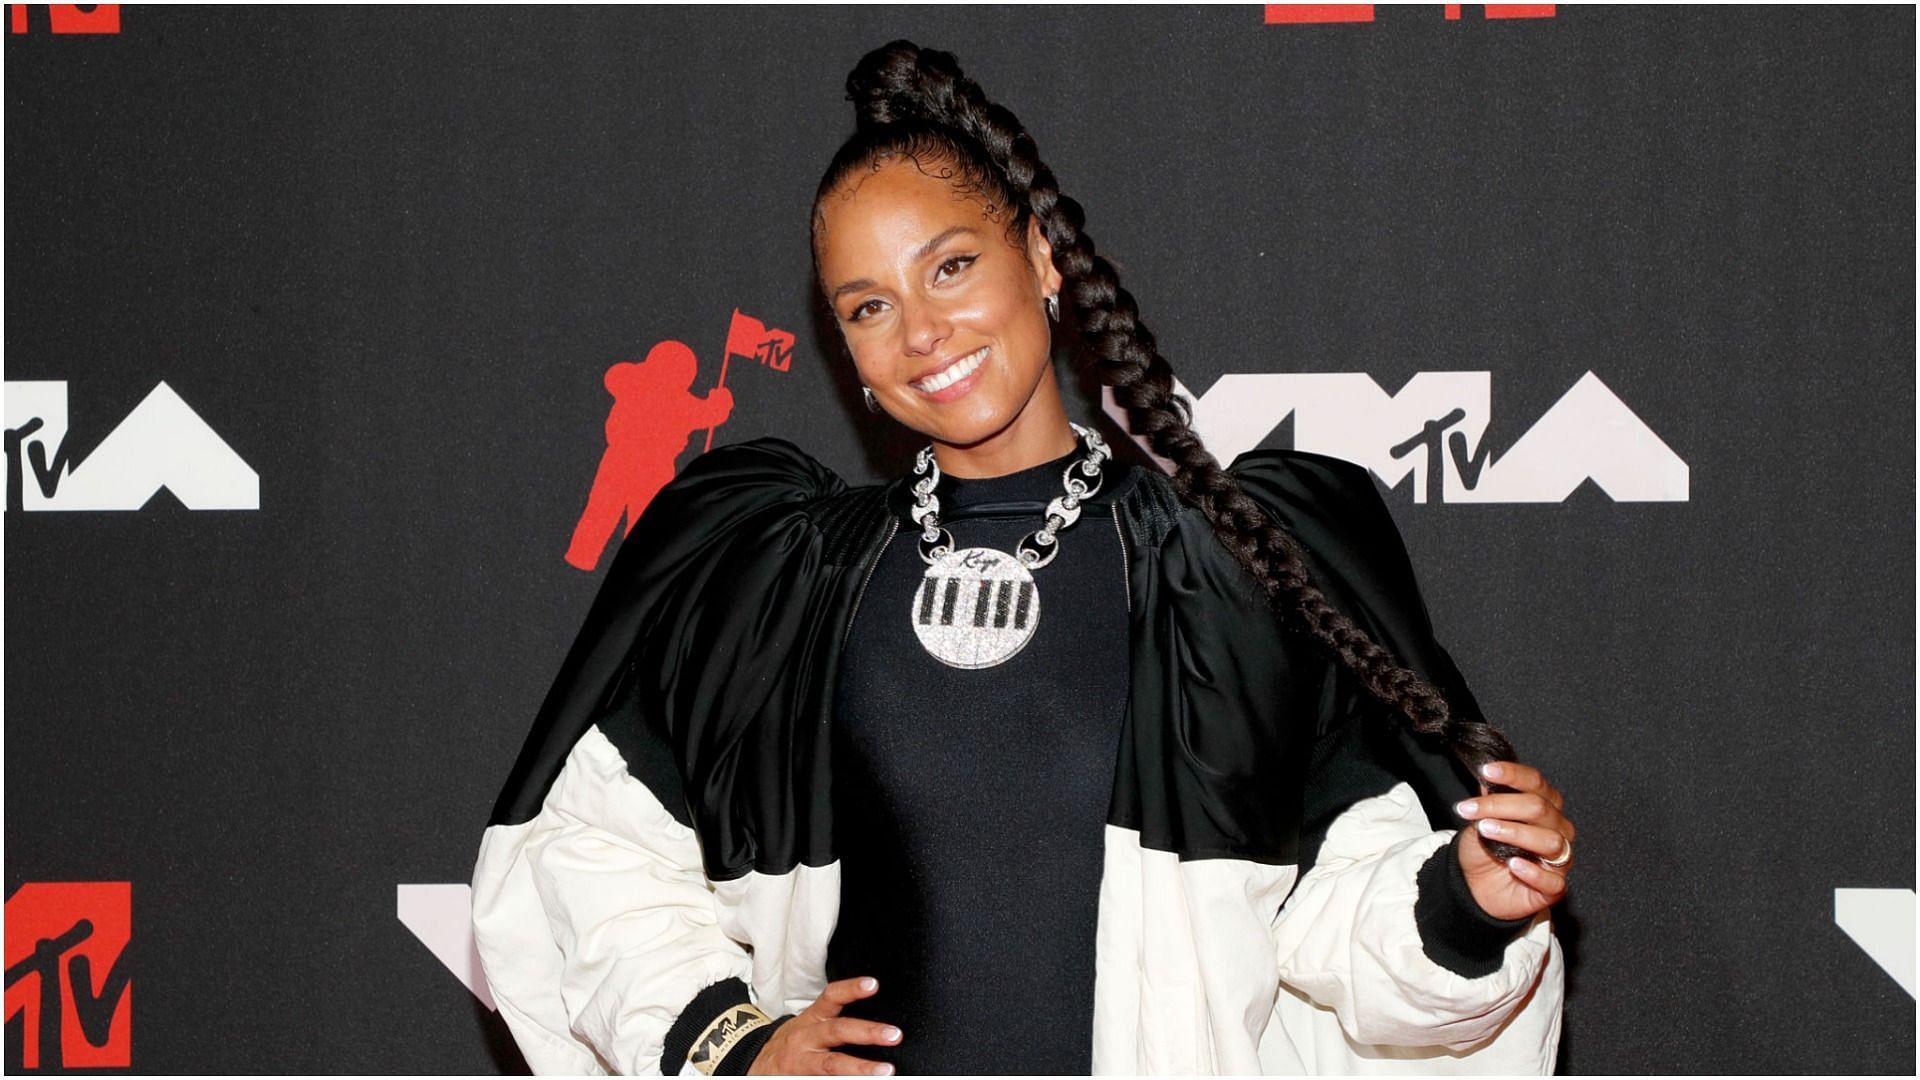 Alicia Keys attends the 2021 MTV Video Music Awards at Barclays Center on September 12, 2021 in the Brooklyn borough of New York City (Image via Getty Images)